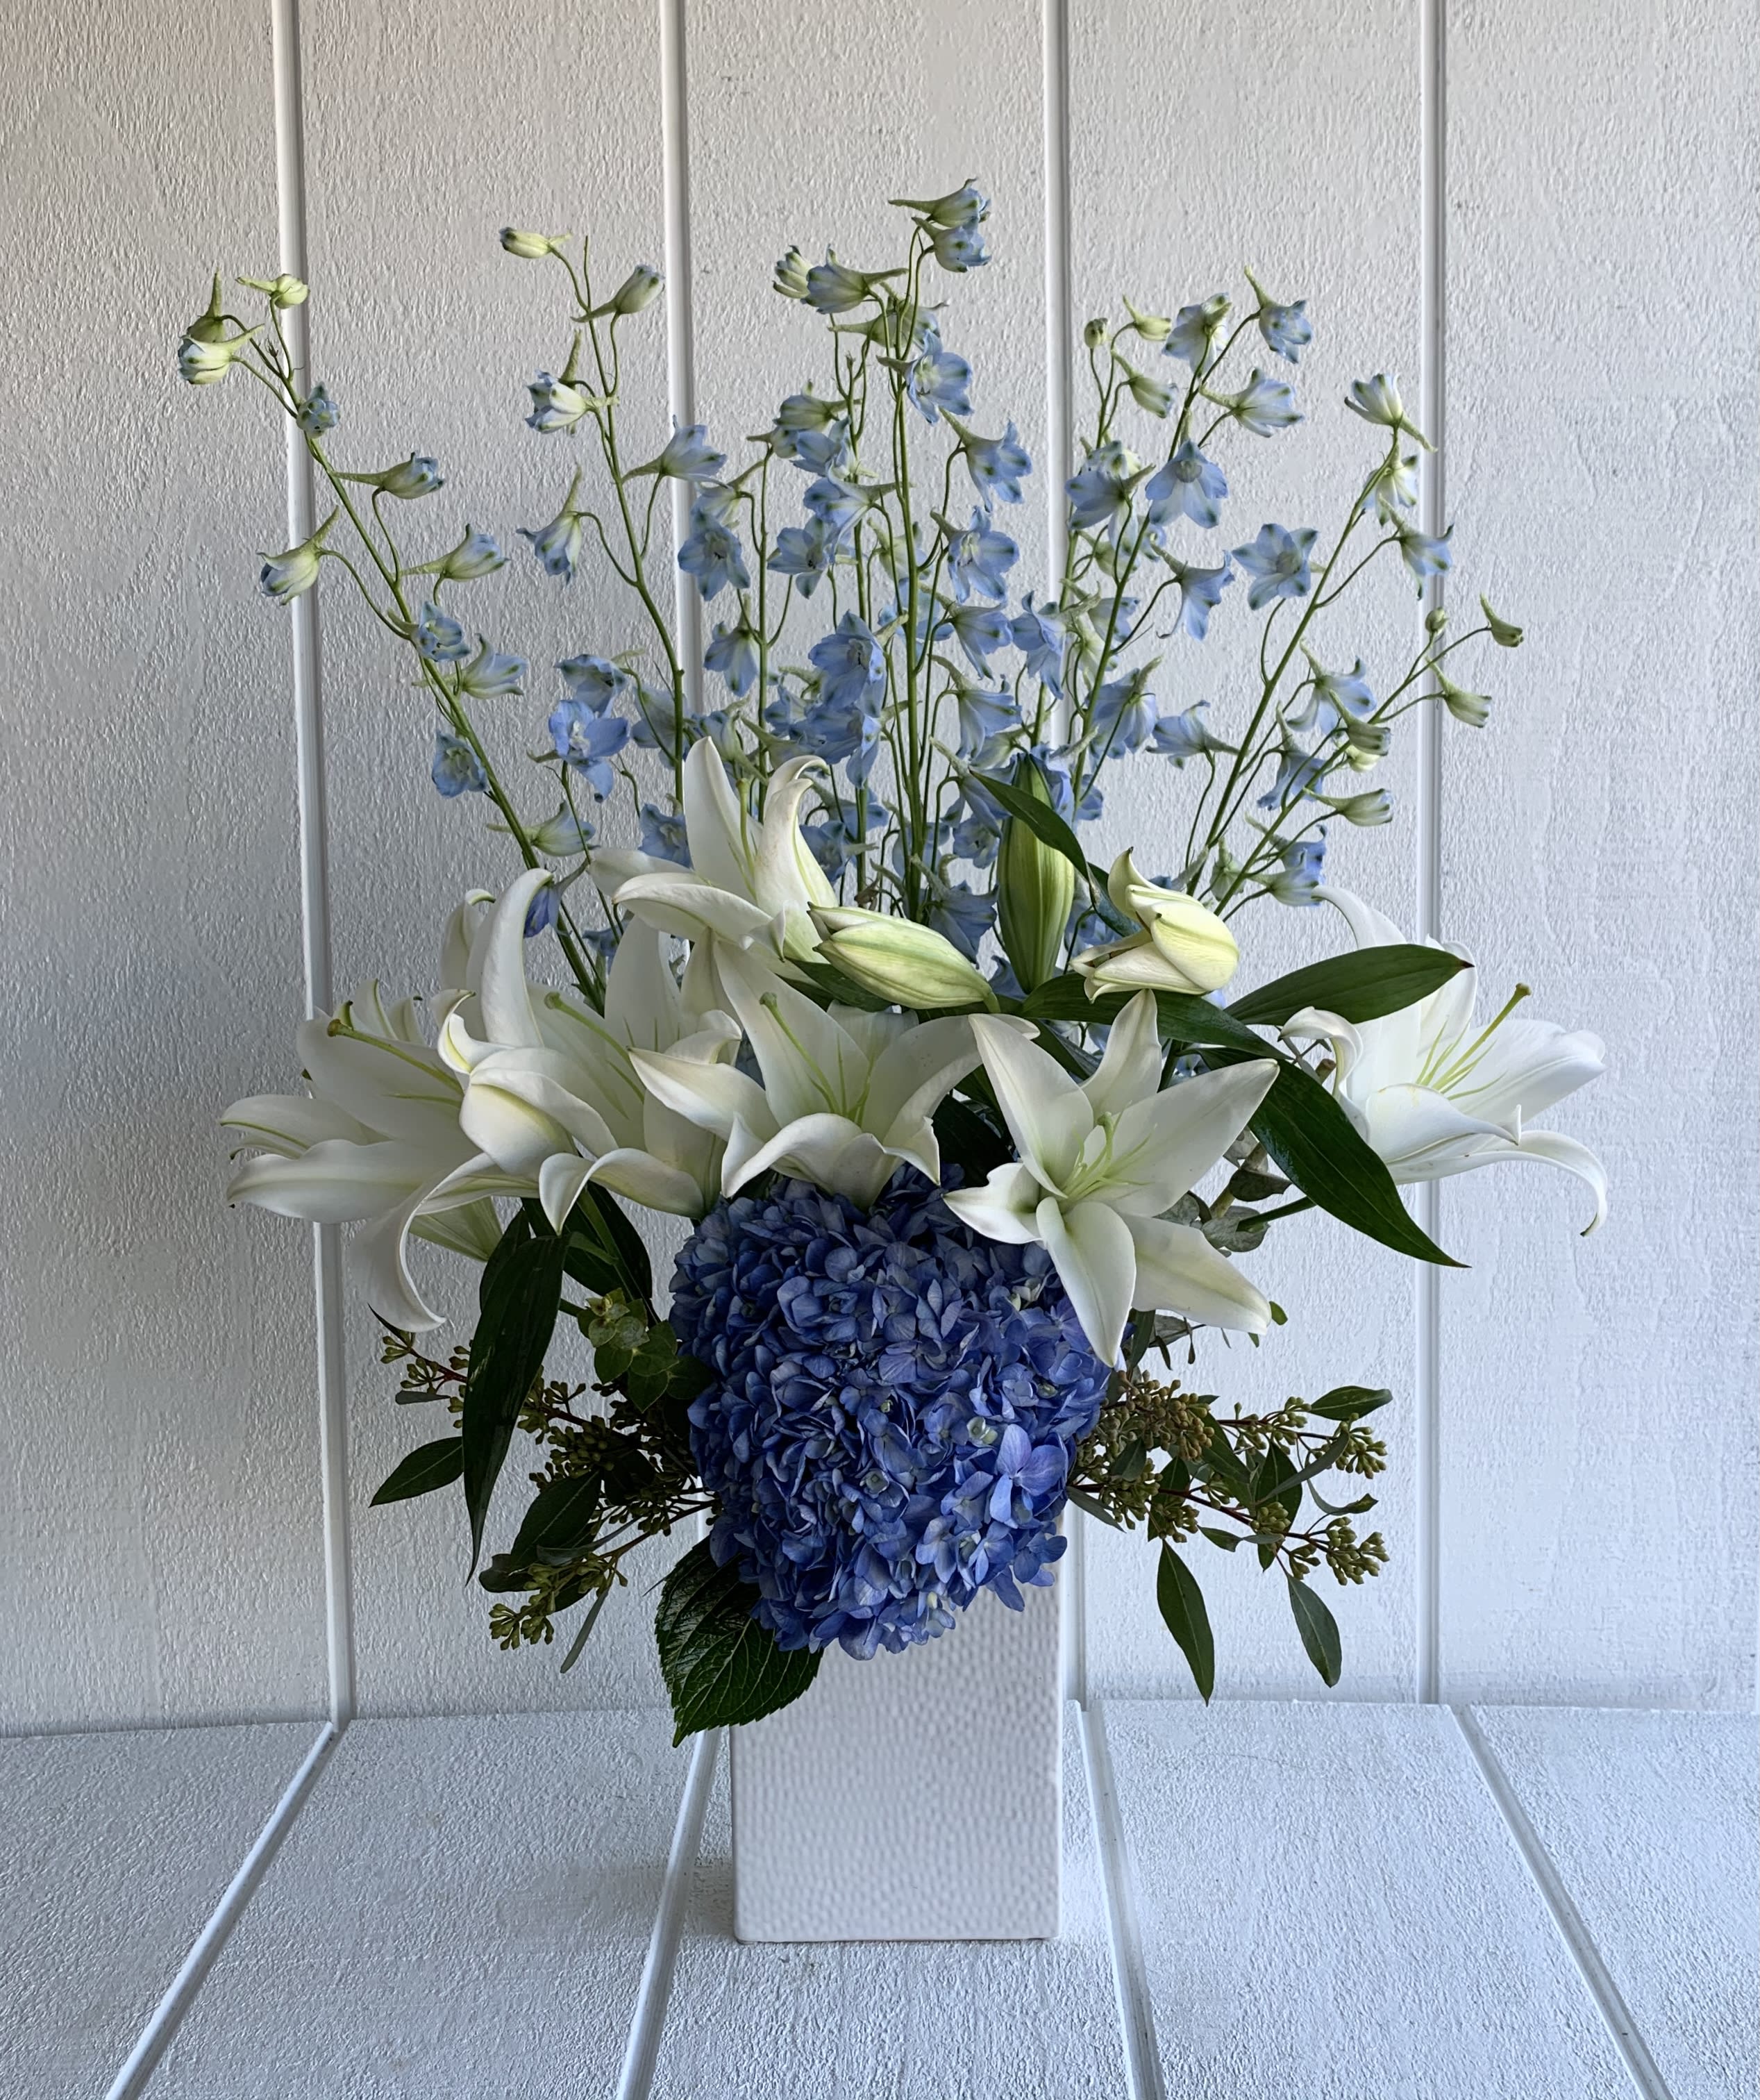 Elegant Blue - A gathering of blue and white that looks best for any special occasion. 8&quot; H x 6&quot; W x 3&quot; D white ceramic vase standing at approximately 25&quot; tall x 20&quot; wide. The colors of Hydrangea &amp; Delphinium are subject to change depending on the market availability (dark or light blue). This picture represents deluxe size.  Availability: 24 hours notice